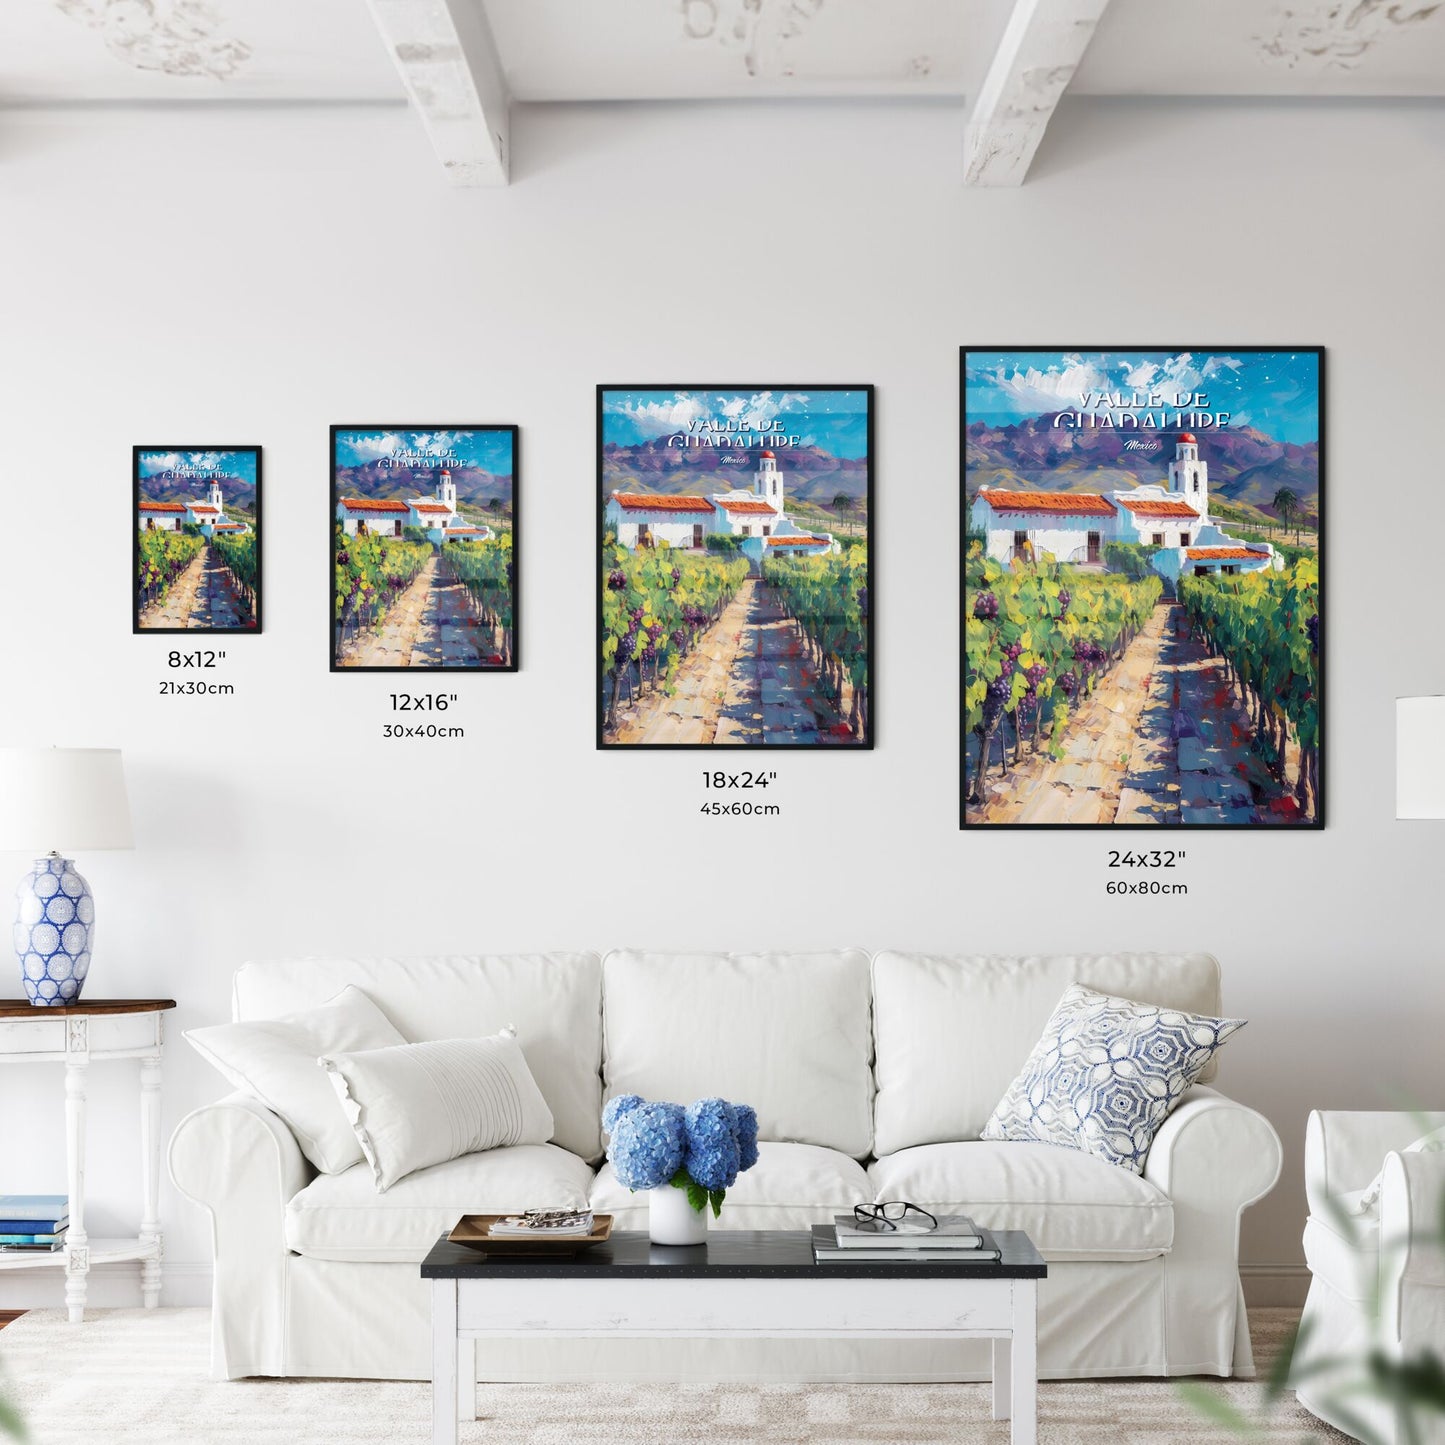 Valle de Guadalupe, Mexico - Art print of a painting of a white building with a red roof surrounded by rows of grapes Default Title